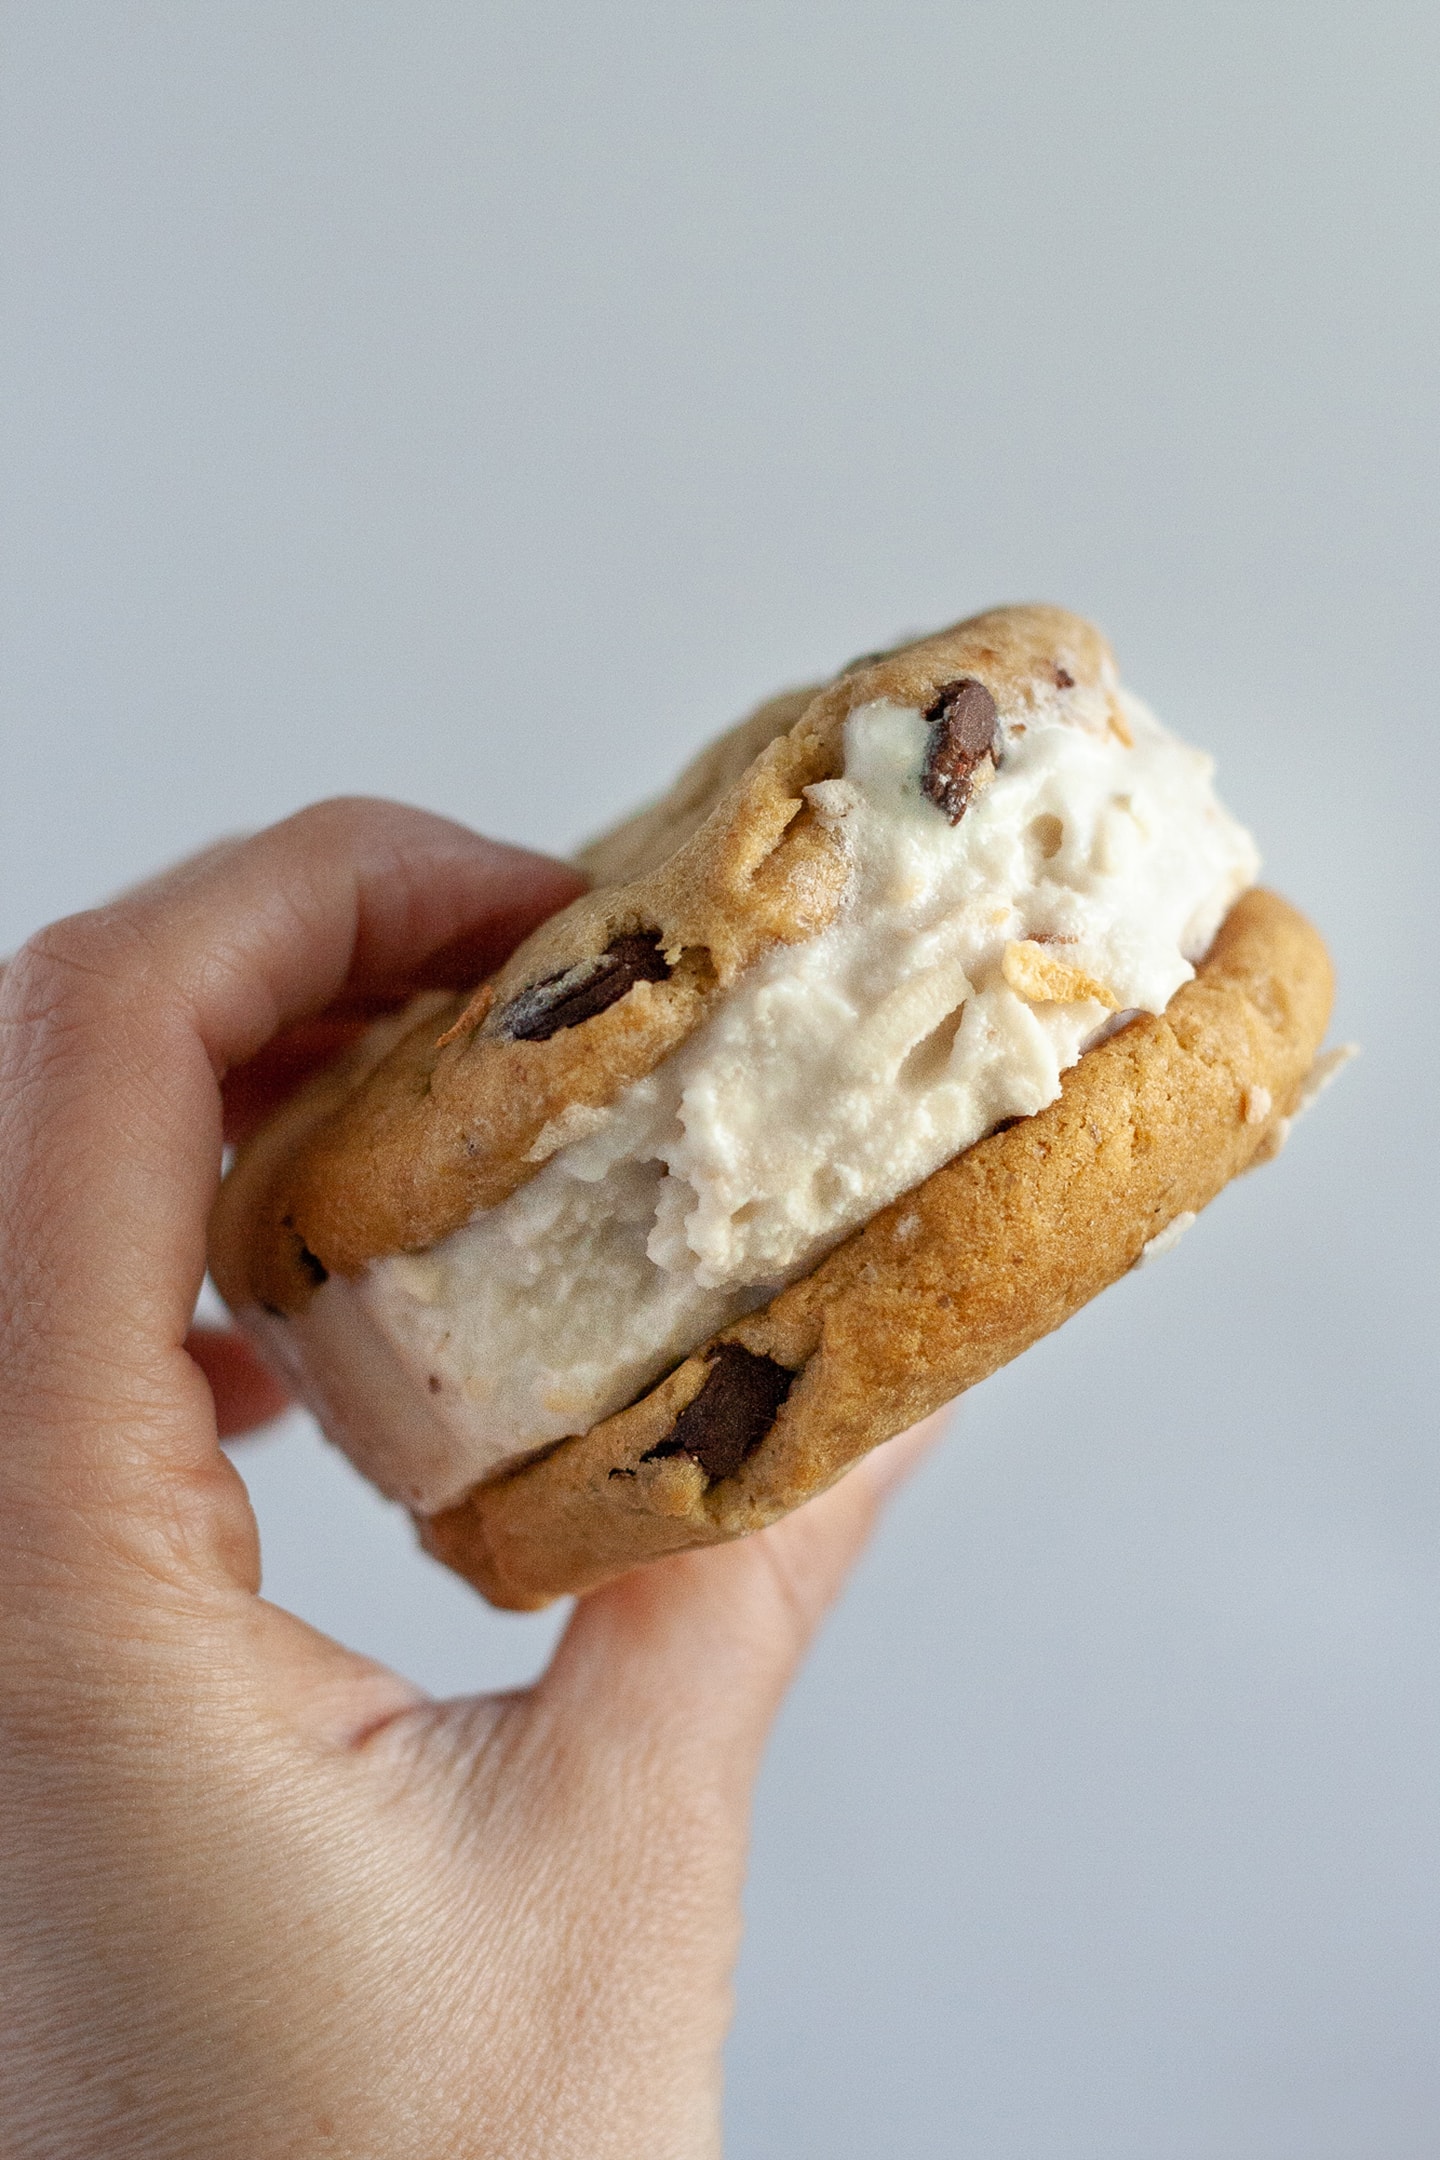 Toasted Coconut Ice Cream sandwich from Well Vegan